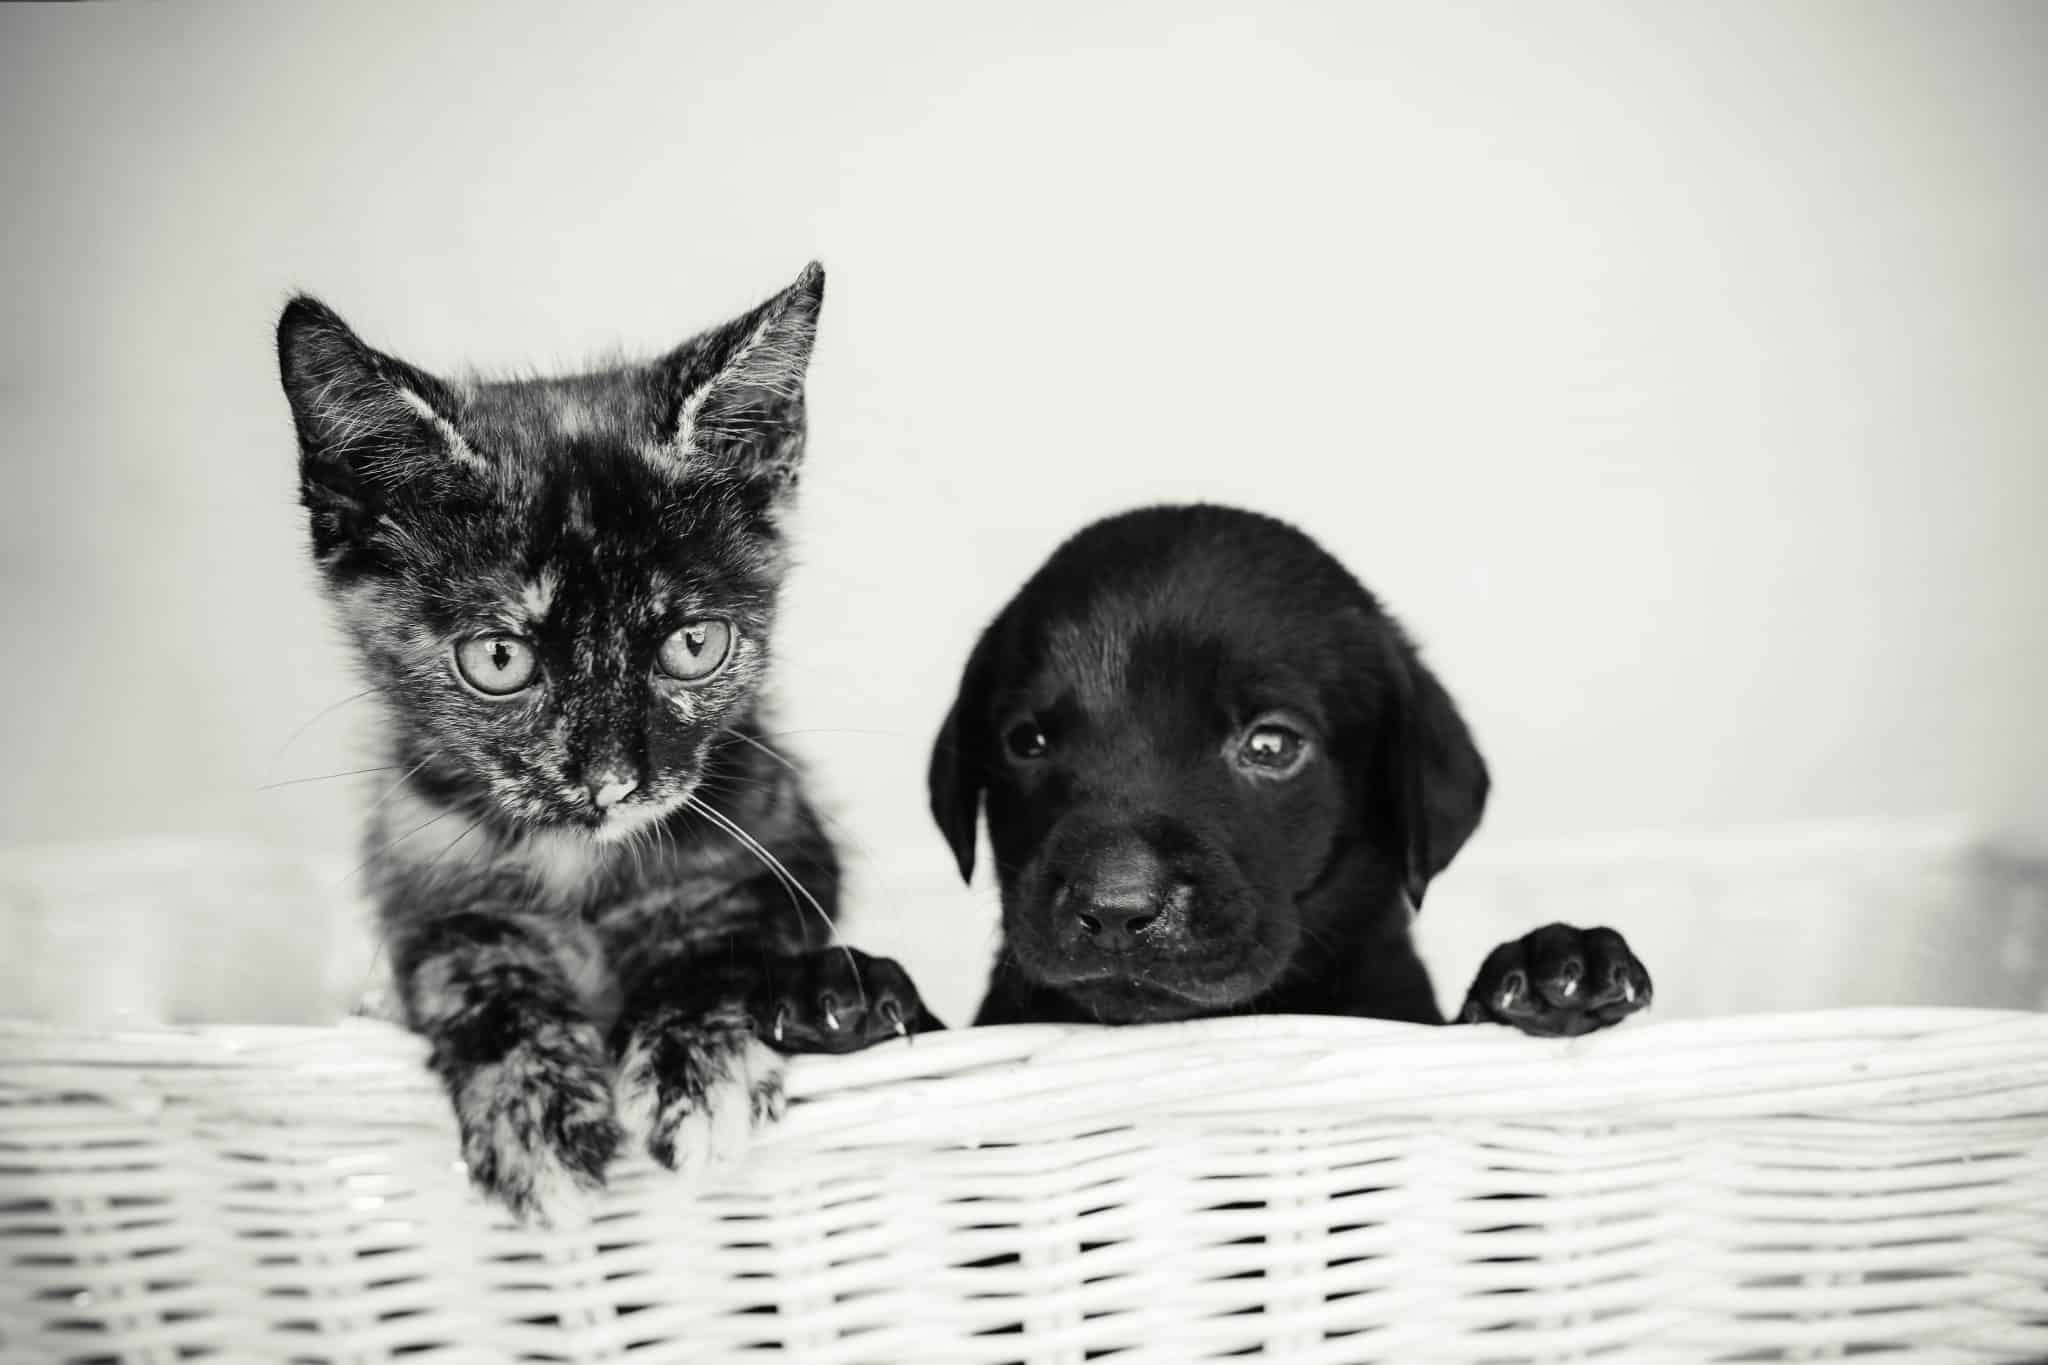 A young kitten and puppy in a white basket